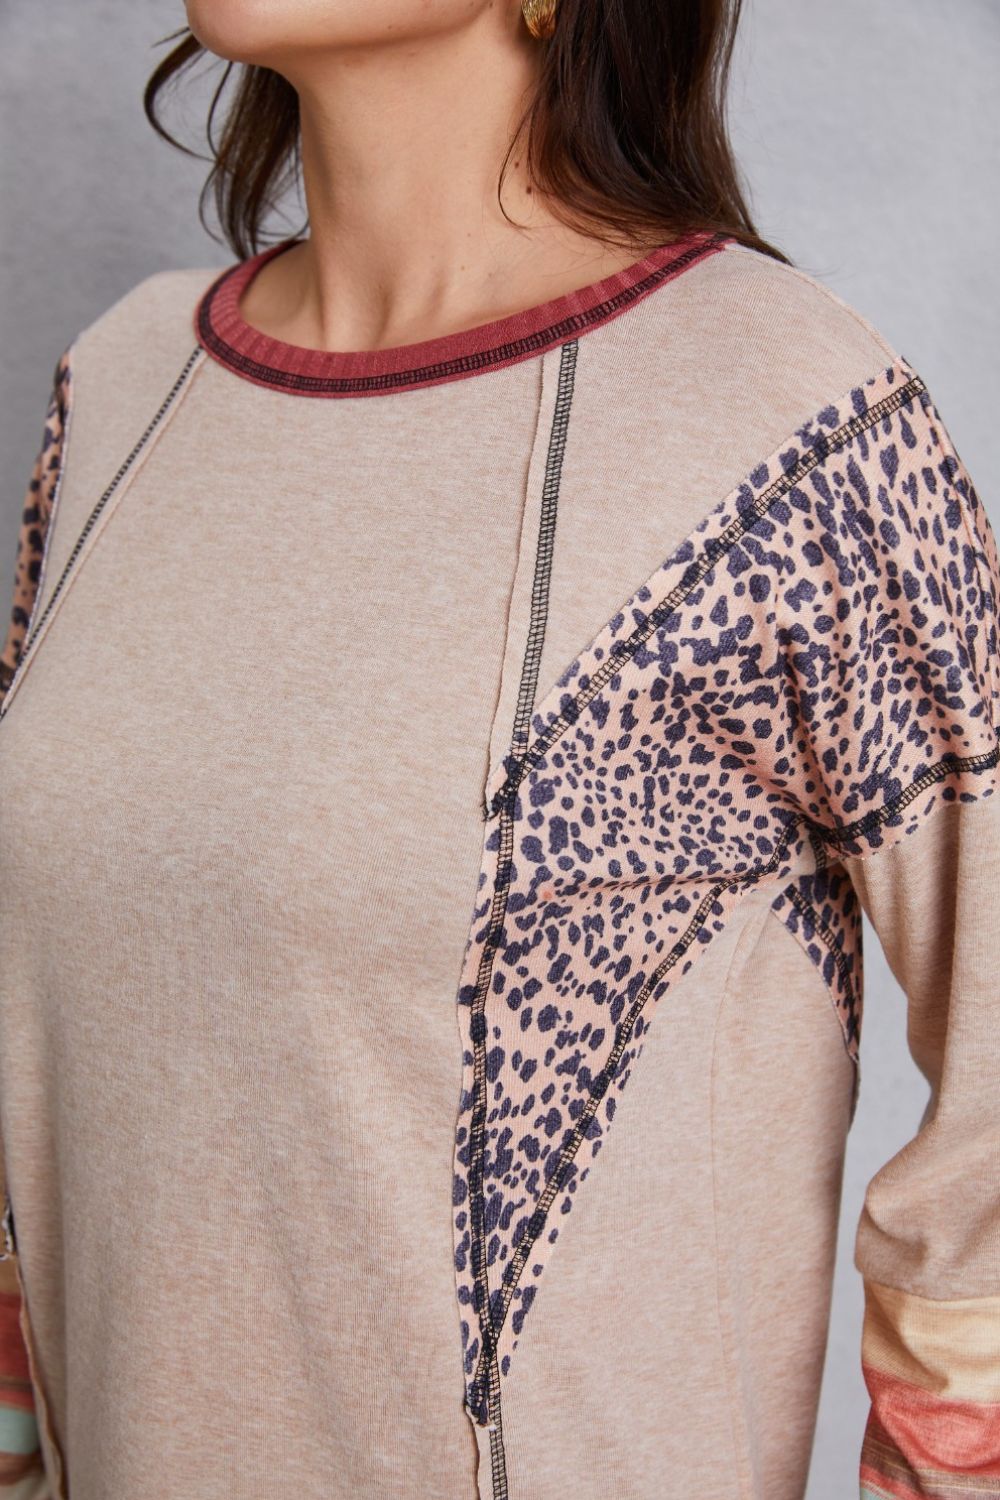 Contrast Stitching Leopard Long Sleeve Blouse - Women’s Clothing & Accessories - Shirts & Tops - 6 - 2024